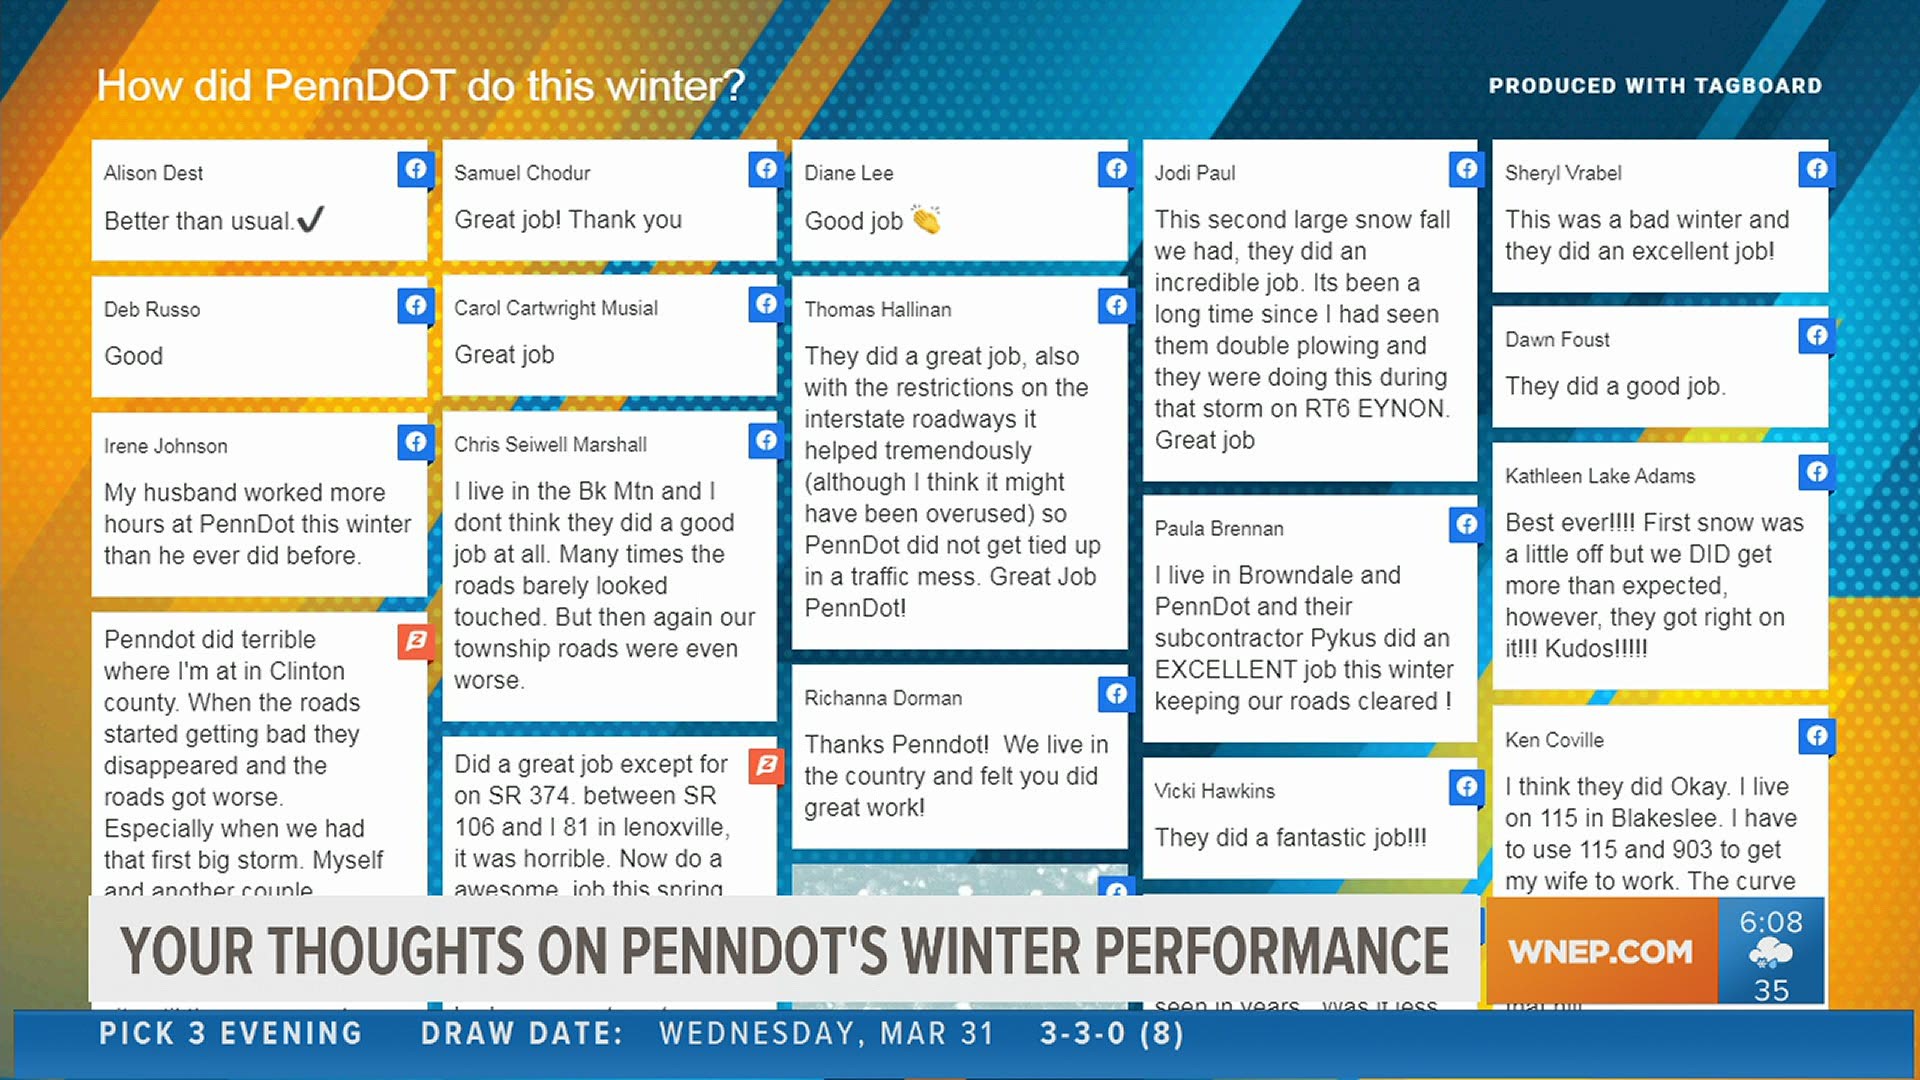 Many of you also sounded off about PennDOT’s performance. Newswatch 16’s Ryan Leckey shared some of your posts on social media and text messages you sent our way.